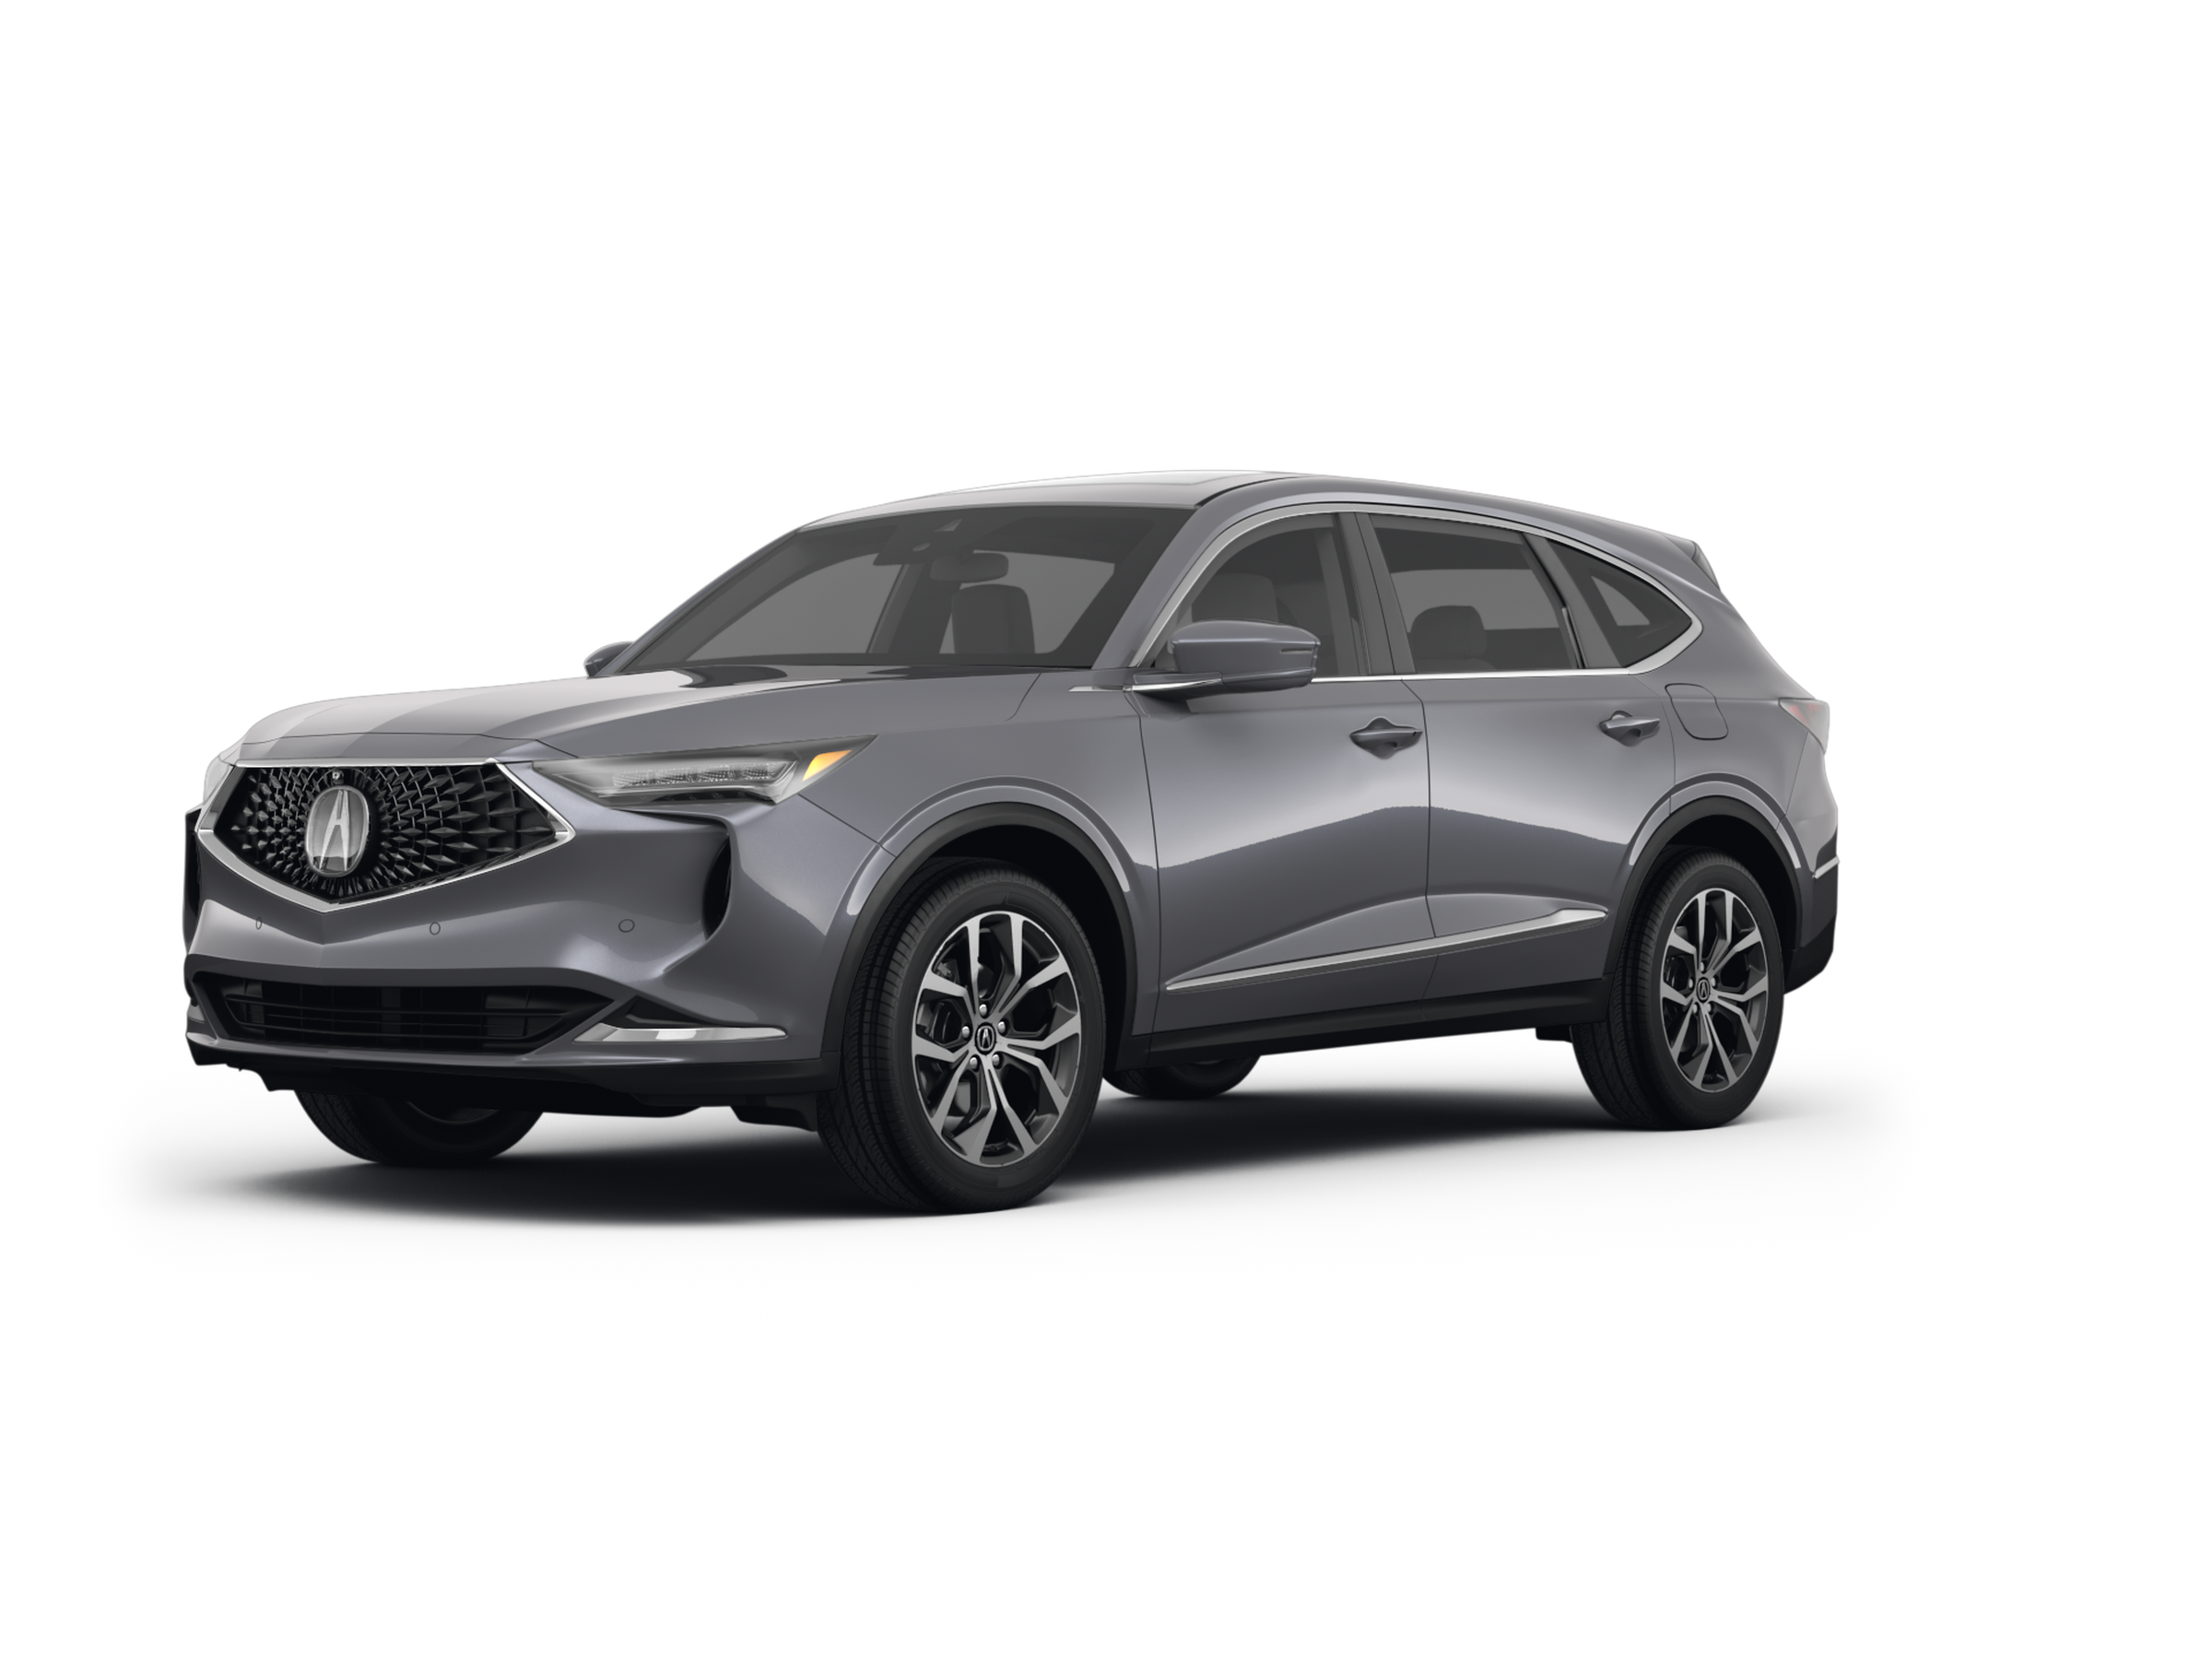 Acura SUV for sale at Muller Acura of Merrillville